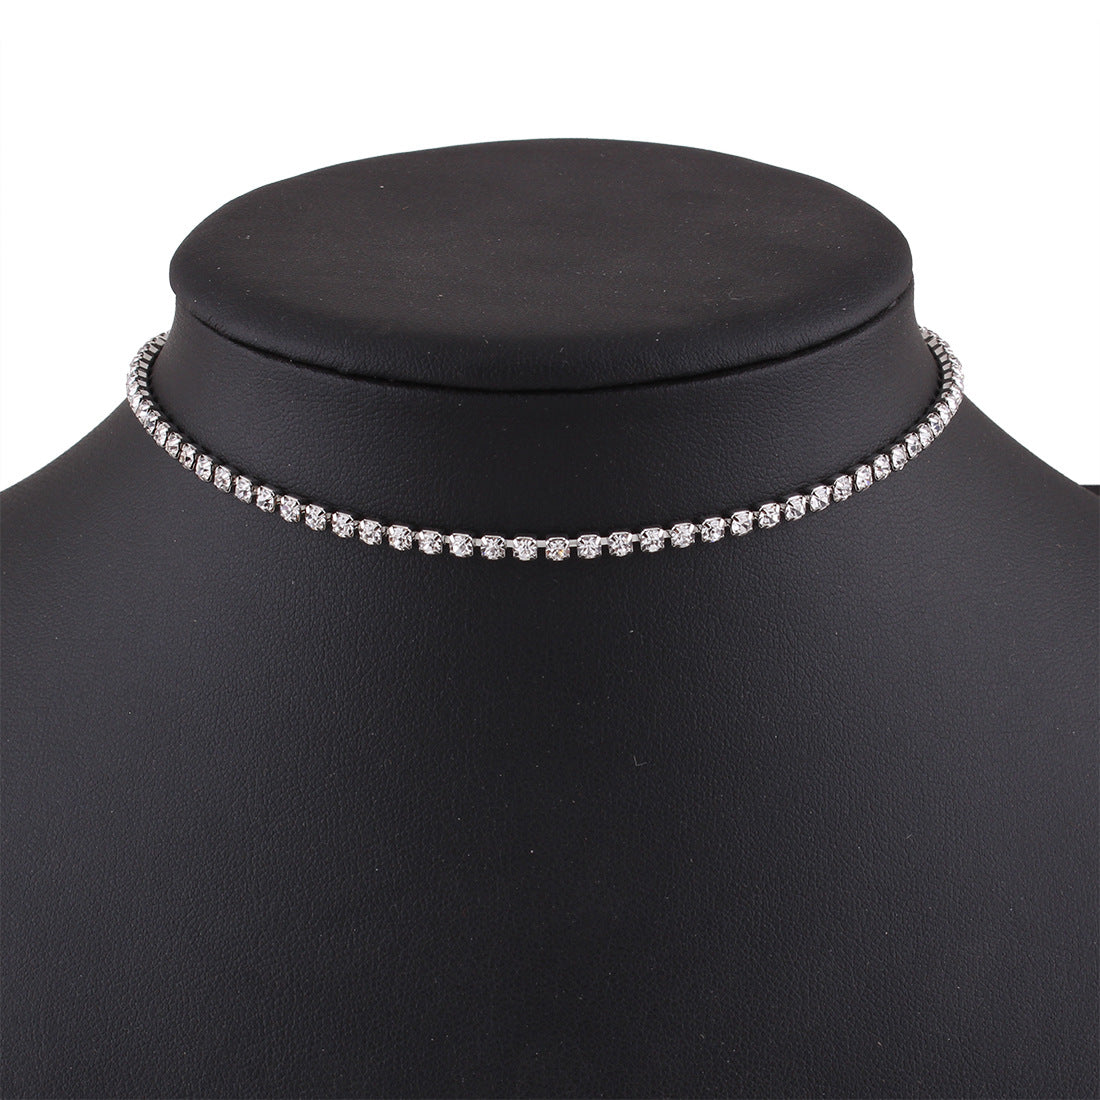 N5612 Europe and America simple temperament model diamond necklace women Clavicle necklace necklace choker hot items